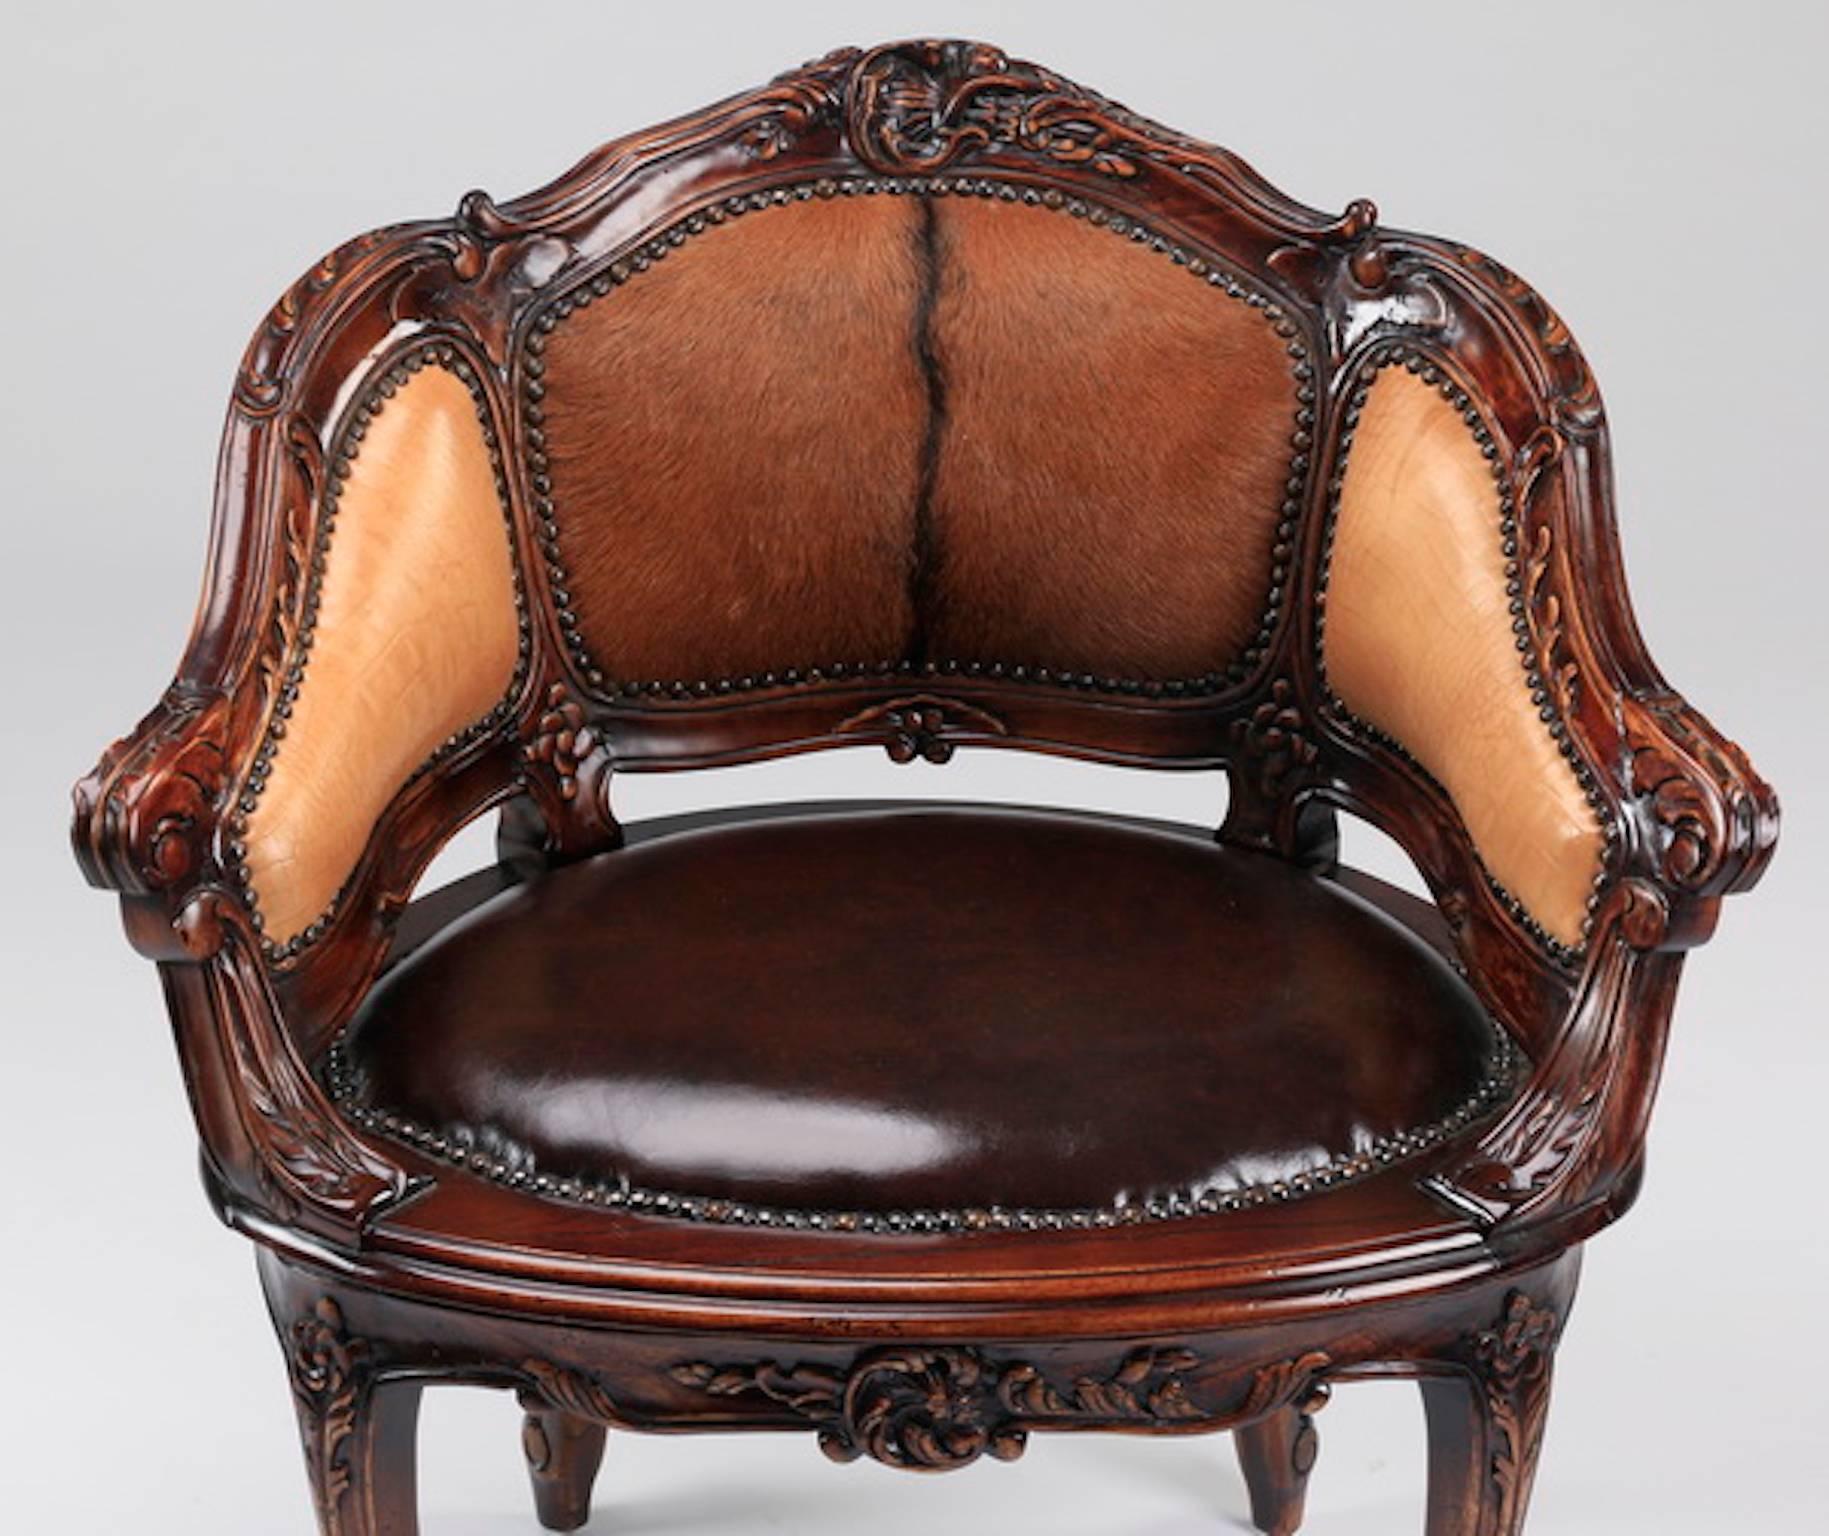 Contemporary Louis XV style petite bergere, the backrest upholstered in hair on hide, the sides and seat in faux leather with nailhead trim, the carved frame and armrests with acanthus scroll motif, above the apron with central shell cartouche, the